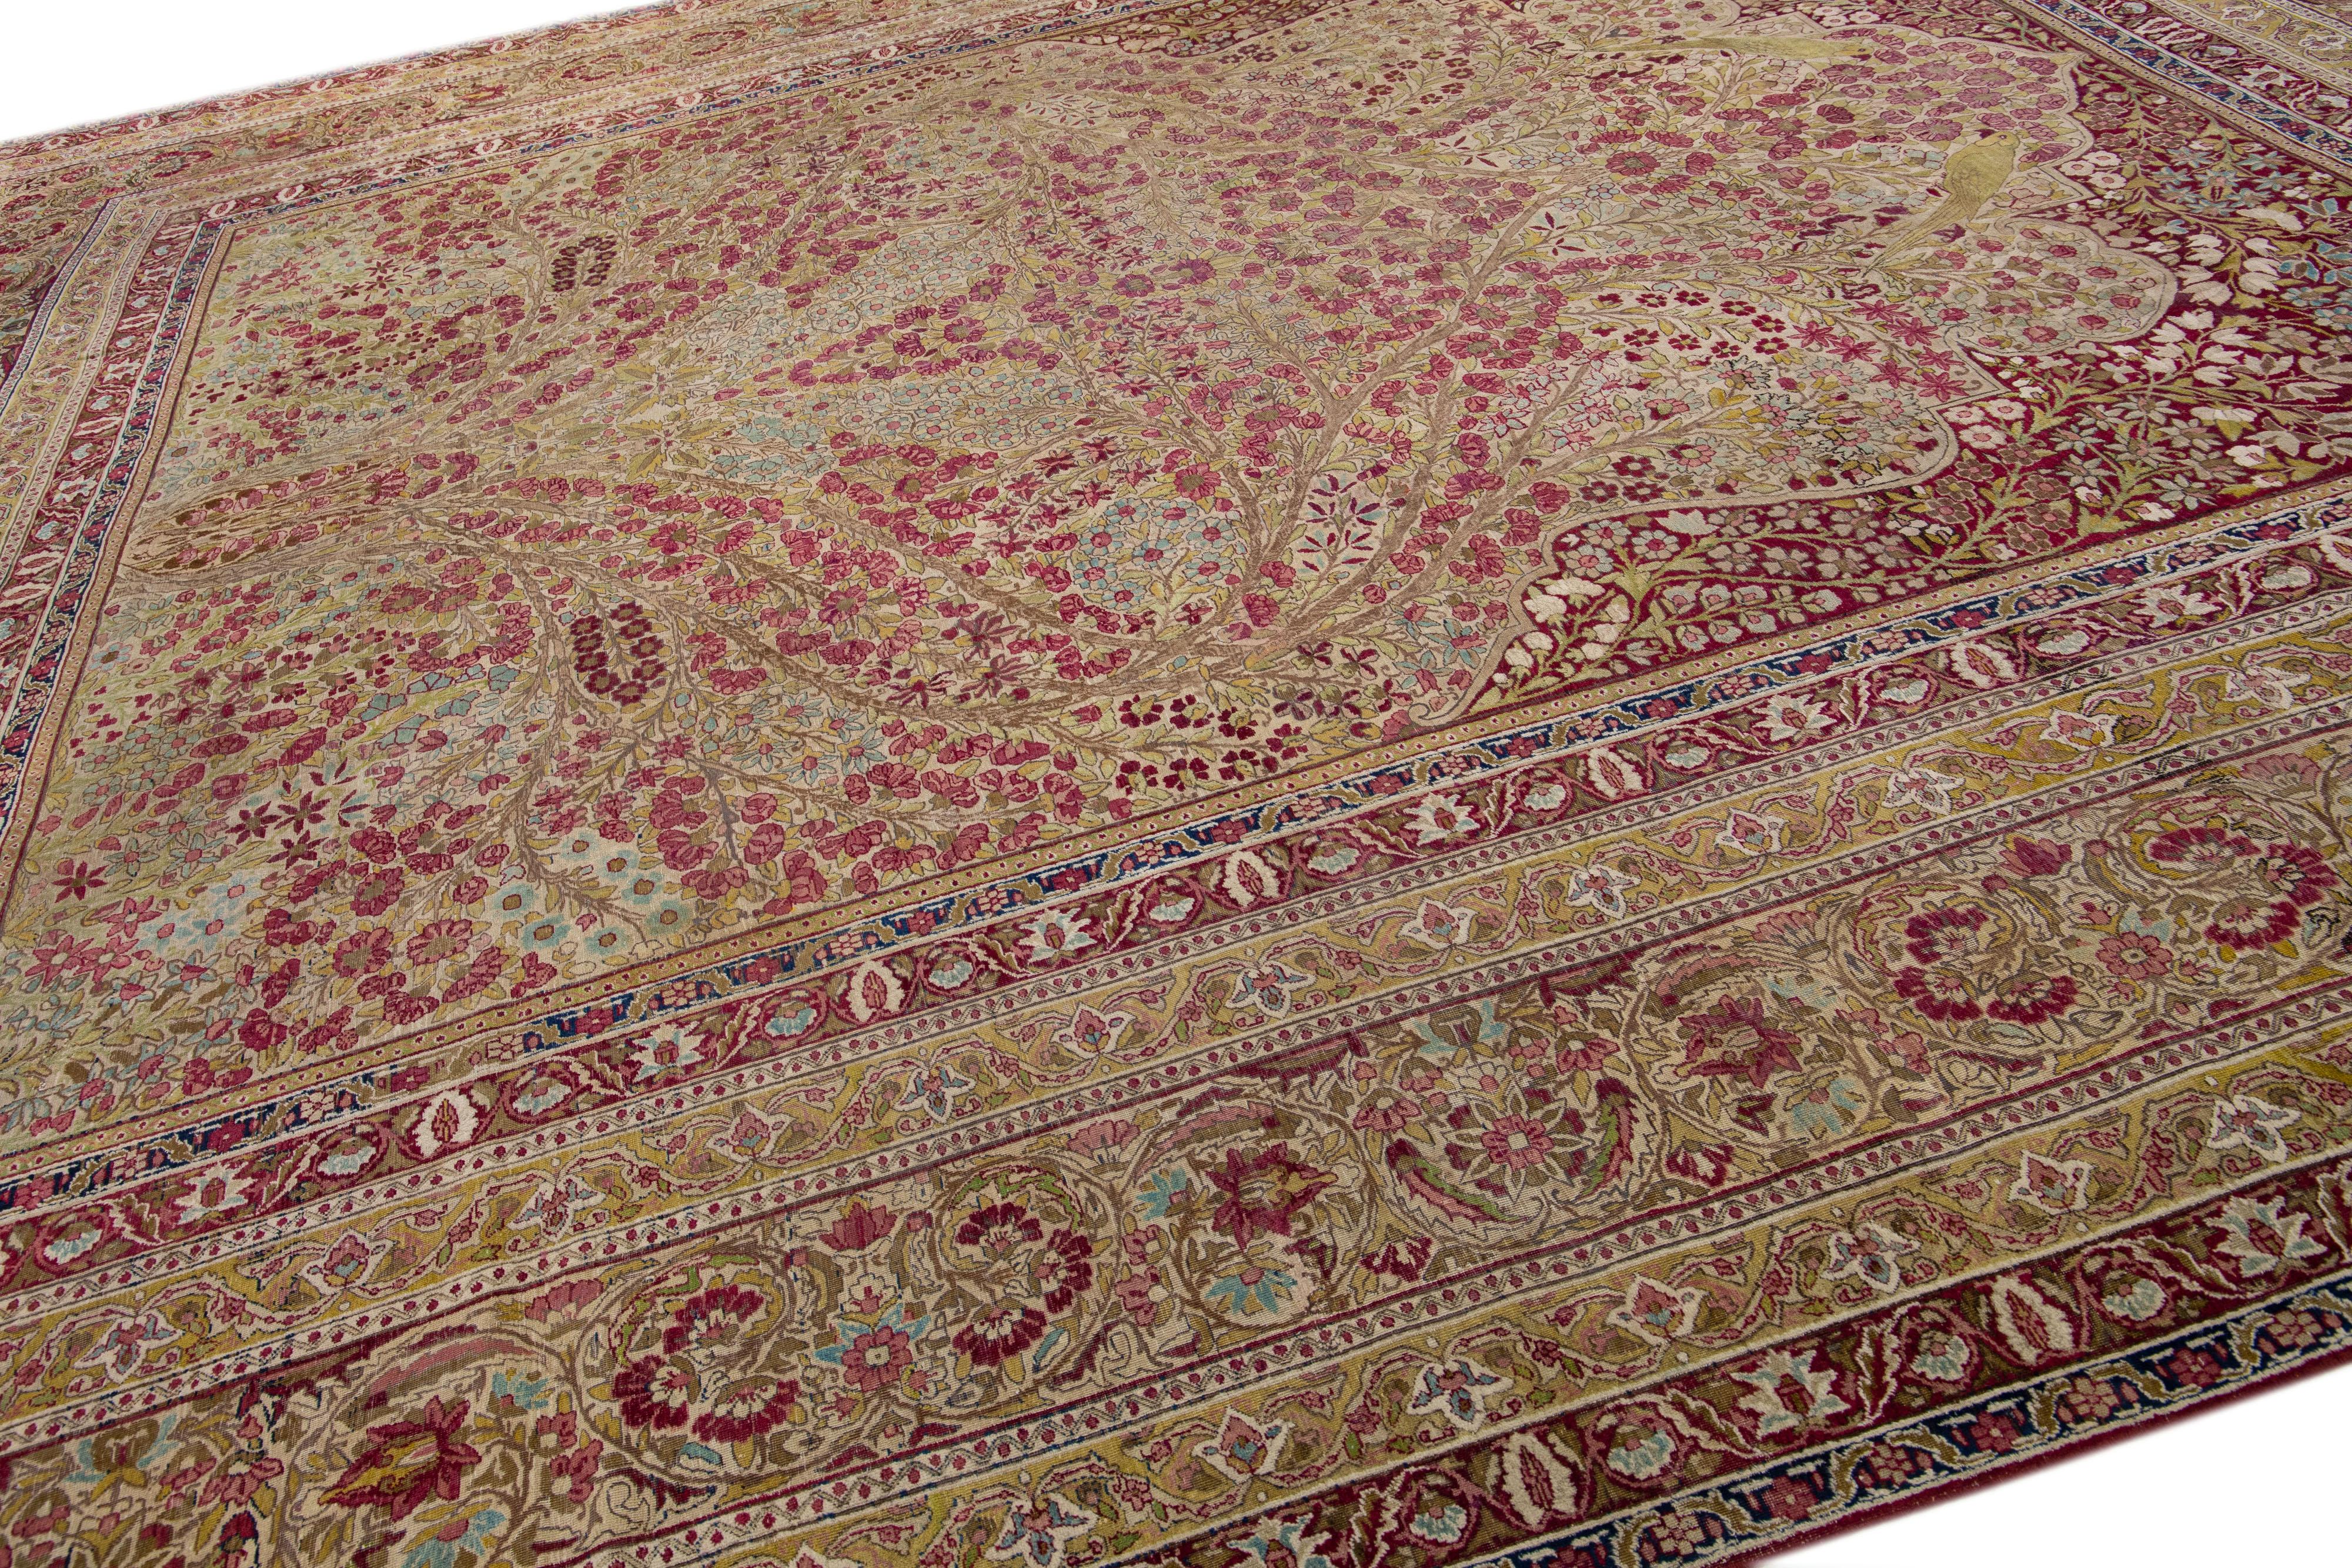 Antique Kerman Handmade Rose Persian Wool Rug with Allover Floral Motif In Good Condition For Sale In Norwalk, CT